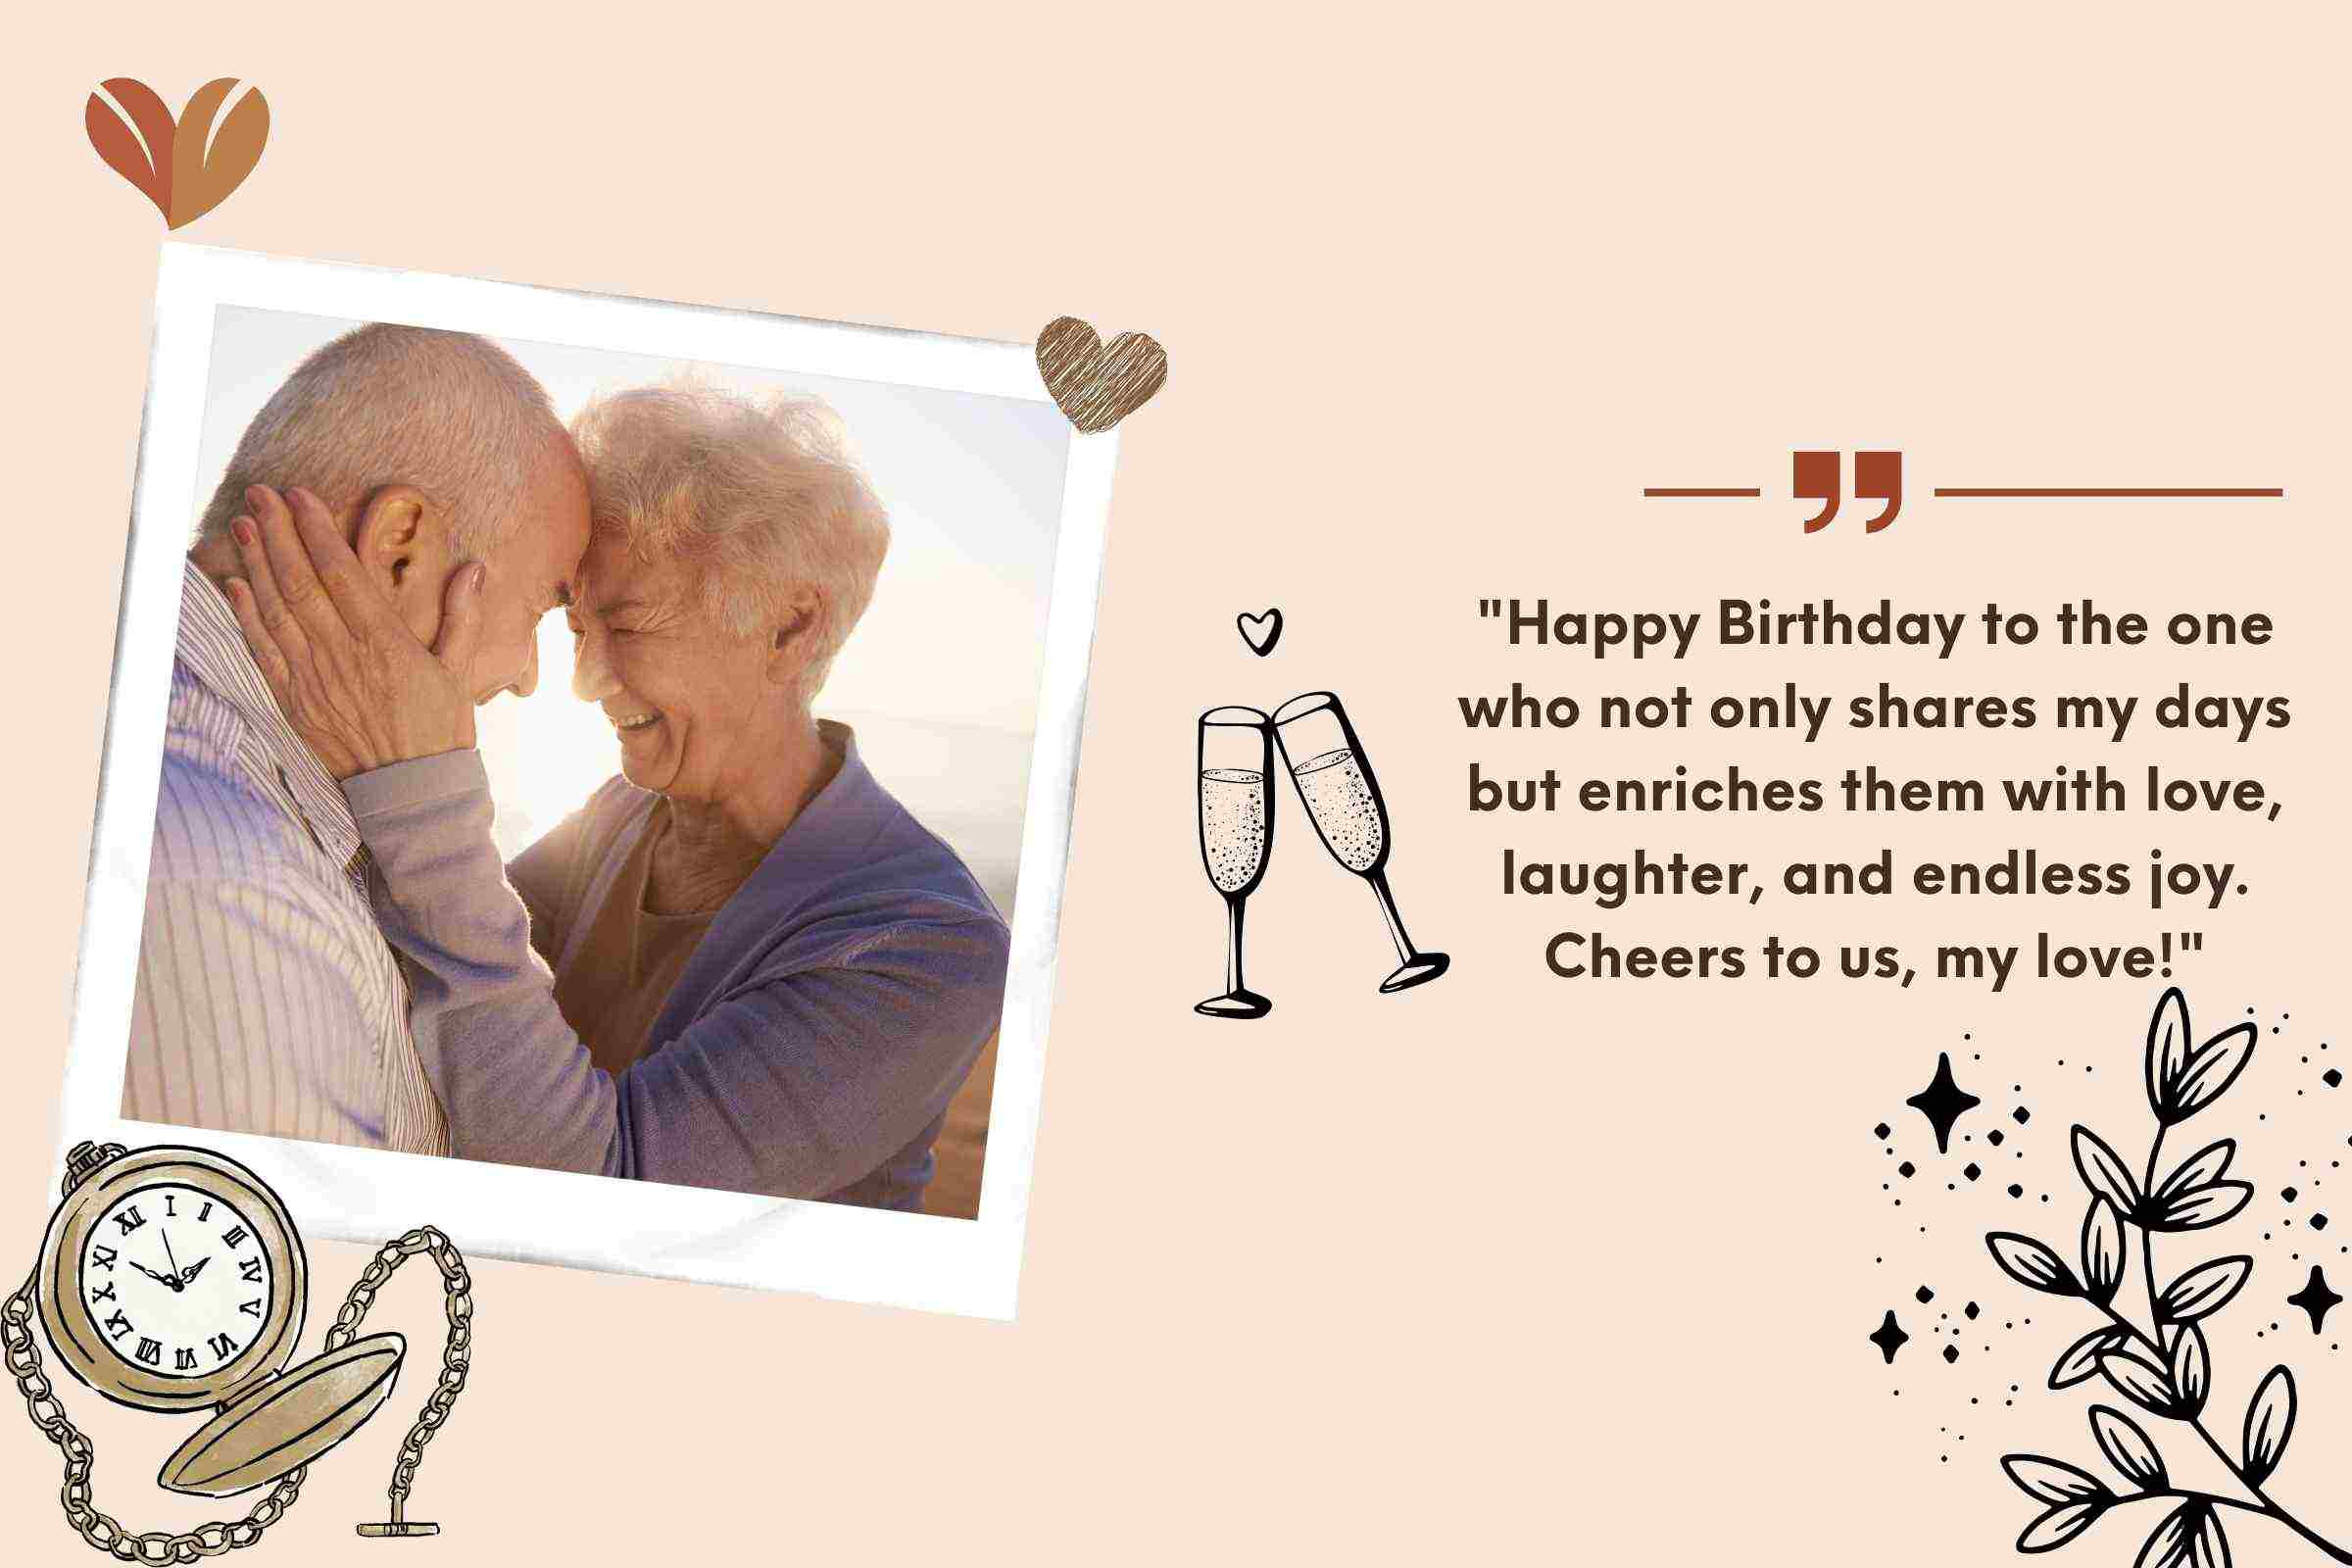 Capturing the essence of our love in every birthday quote. Here's to another year of joy and shared dreams!